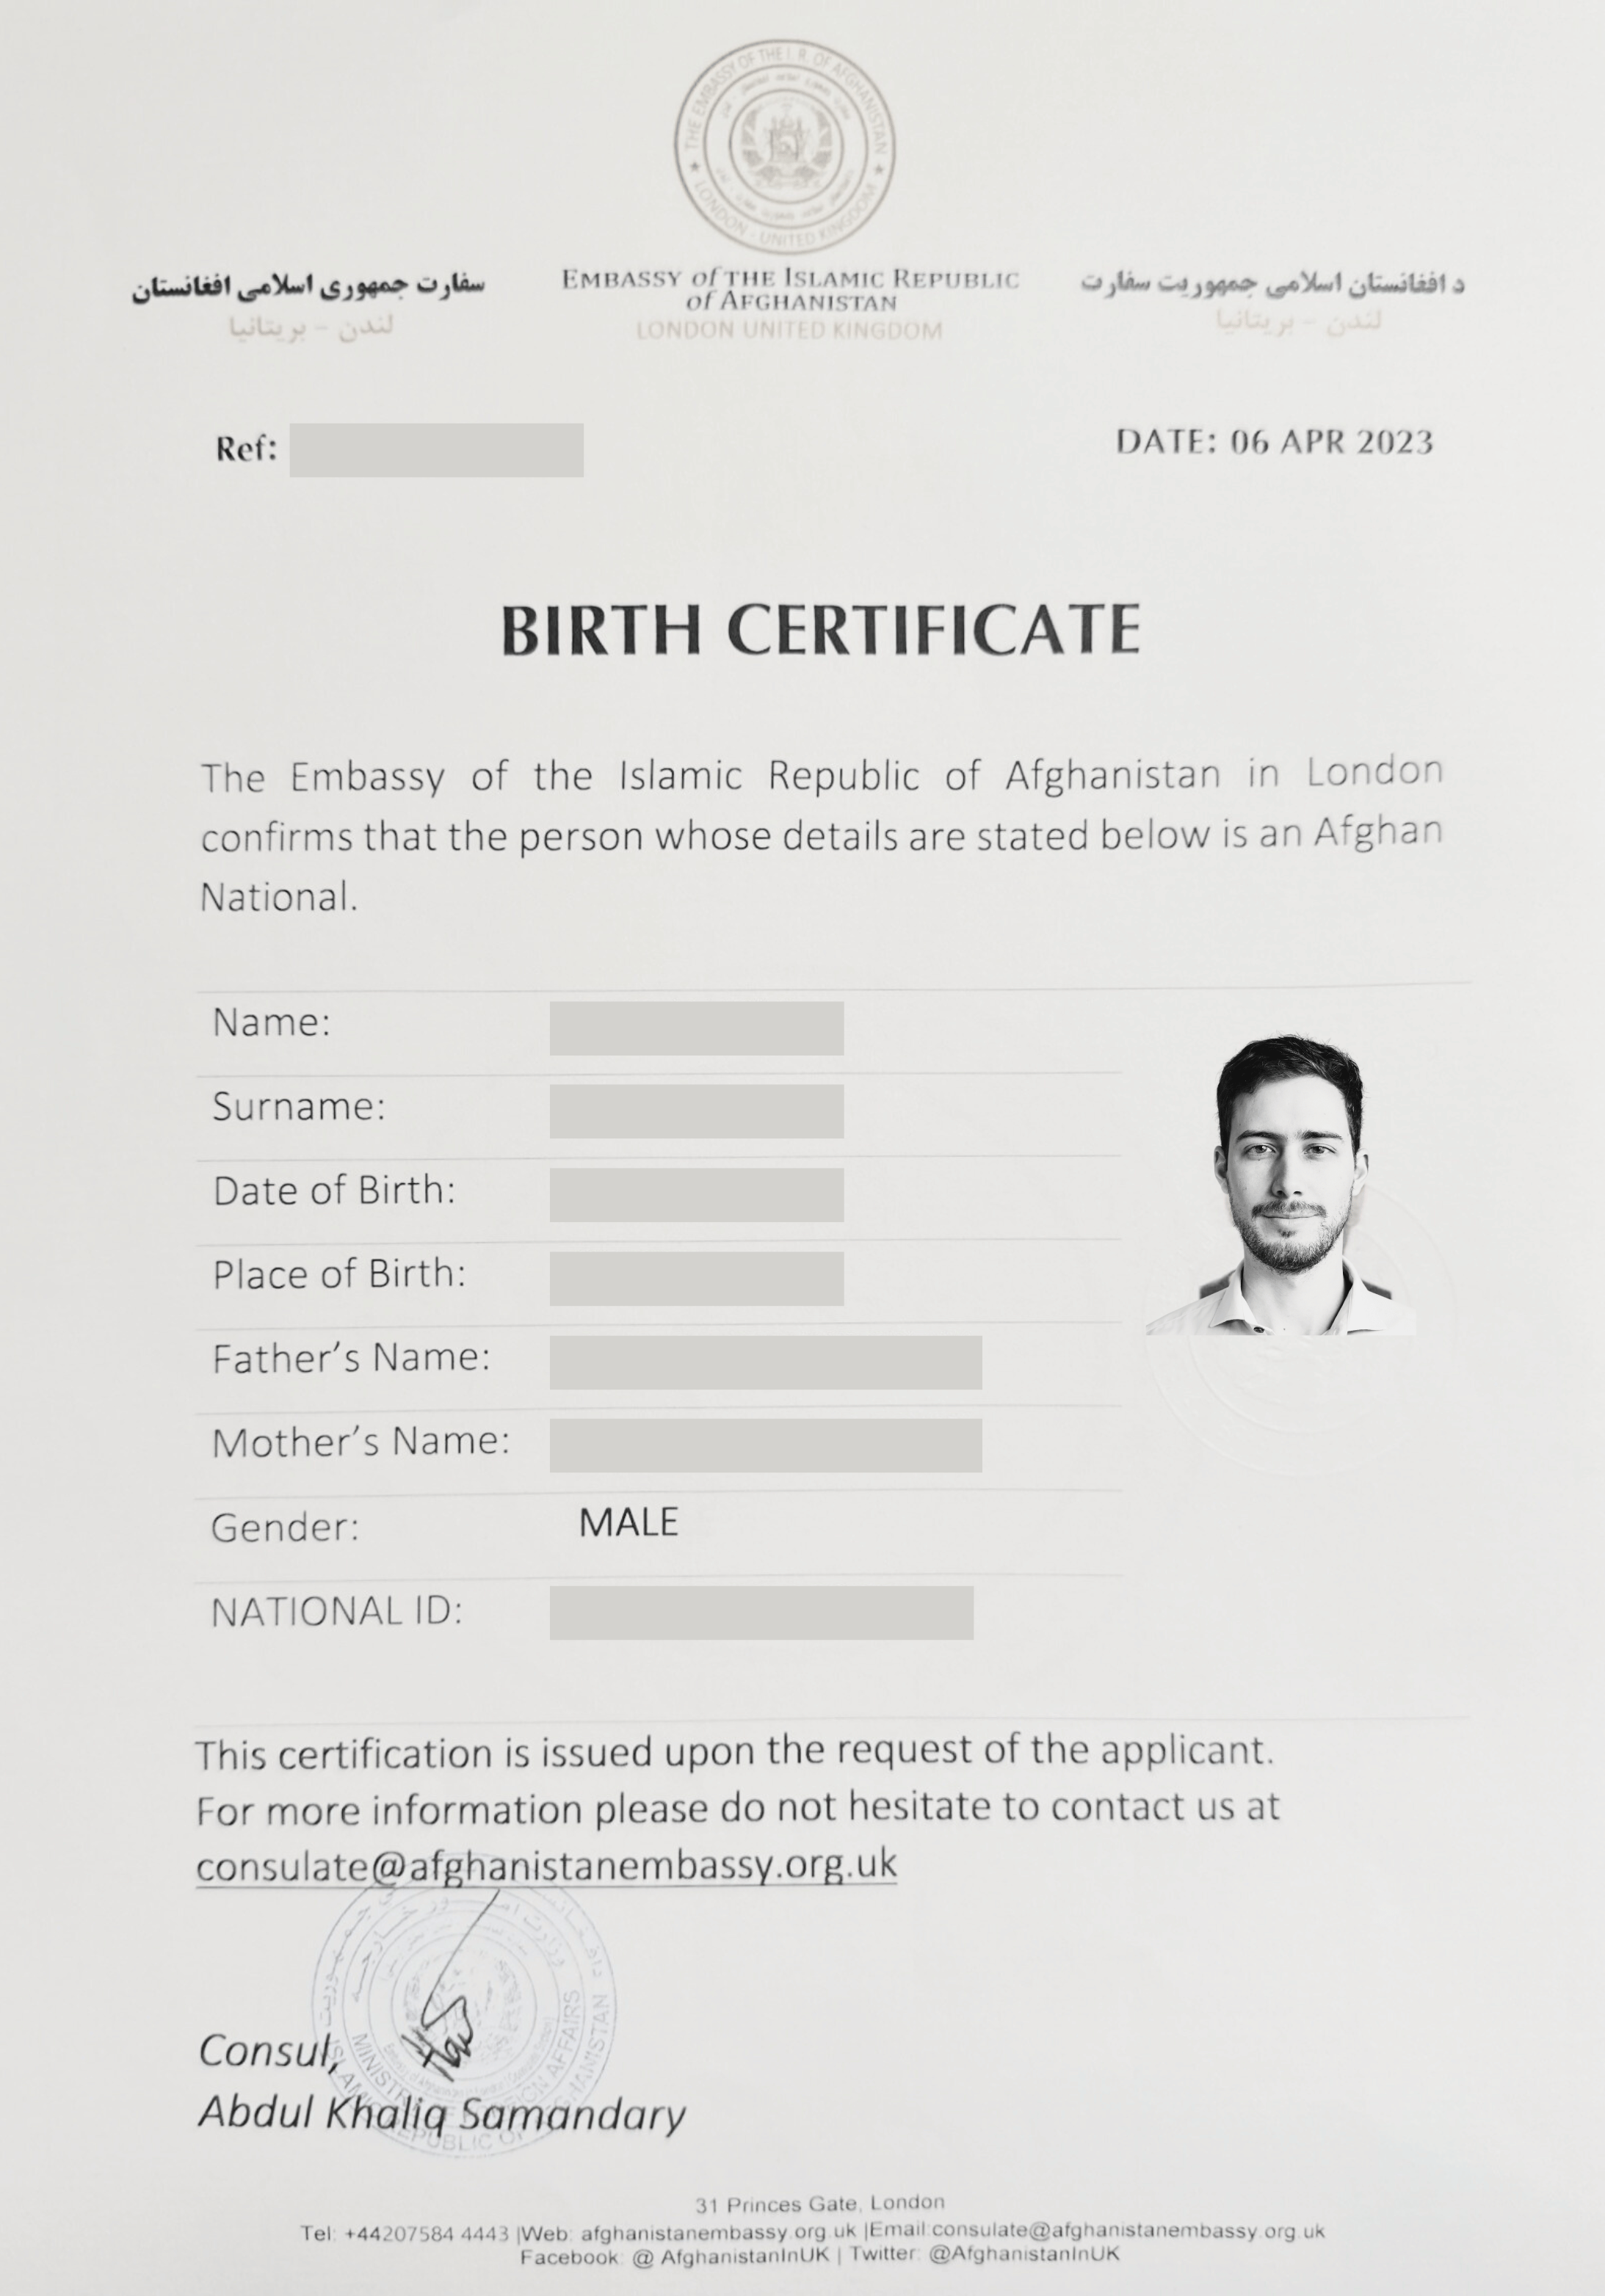 Afghan Birth Certificate issued by the Afghan Embassy in London